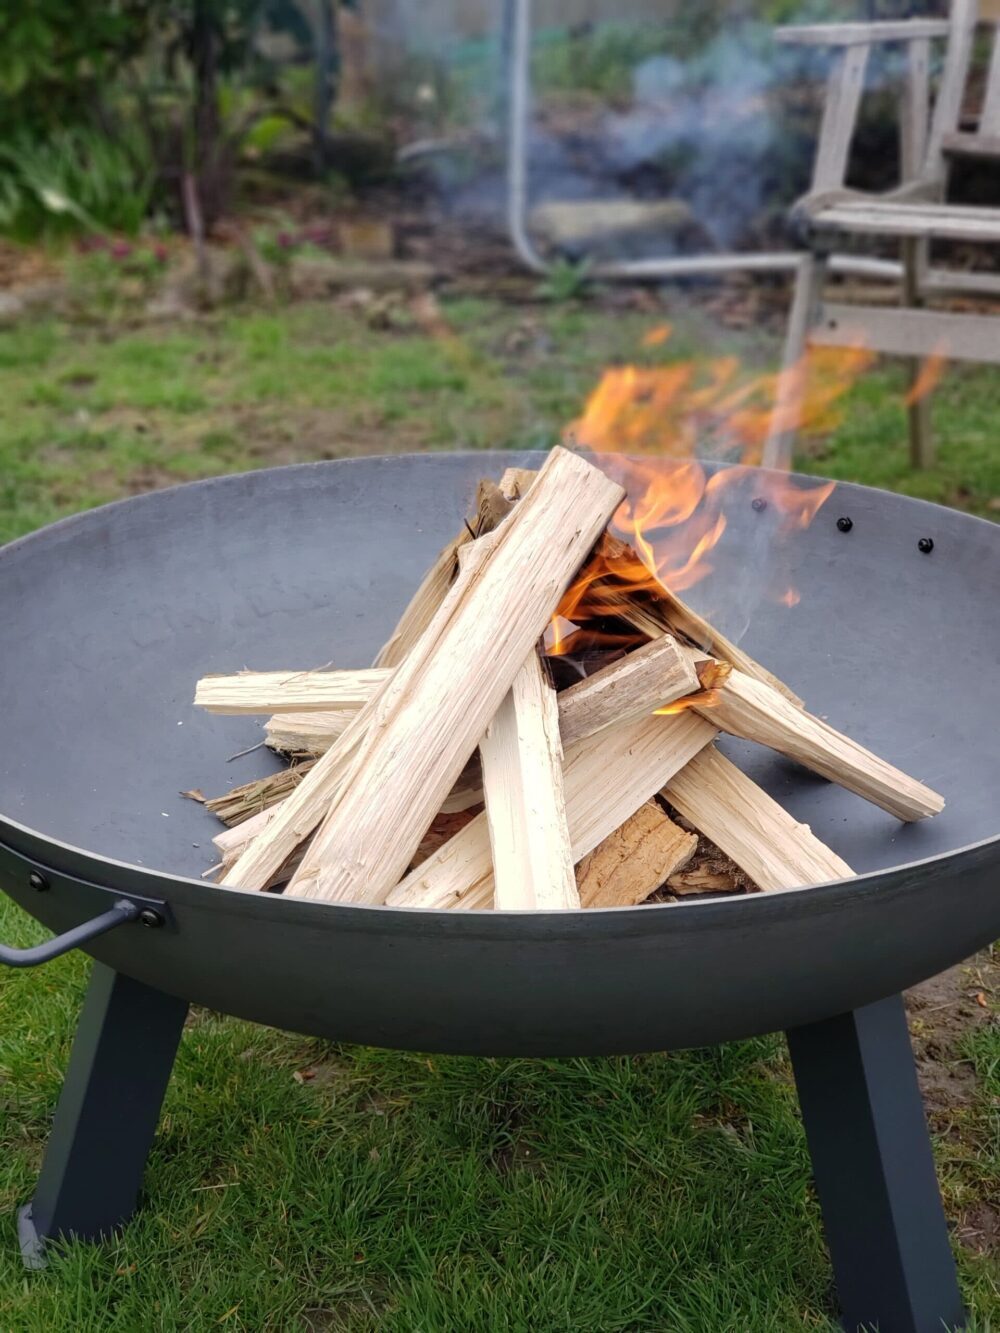 How To Start A Fire In Pit, Best Kindling For Fire Pit